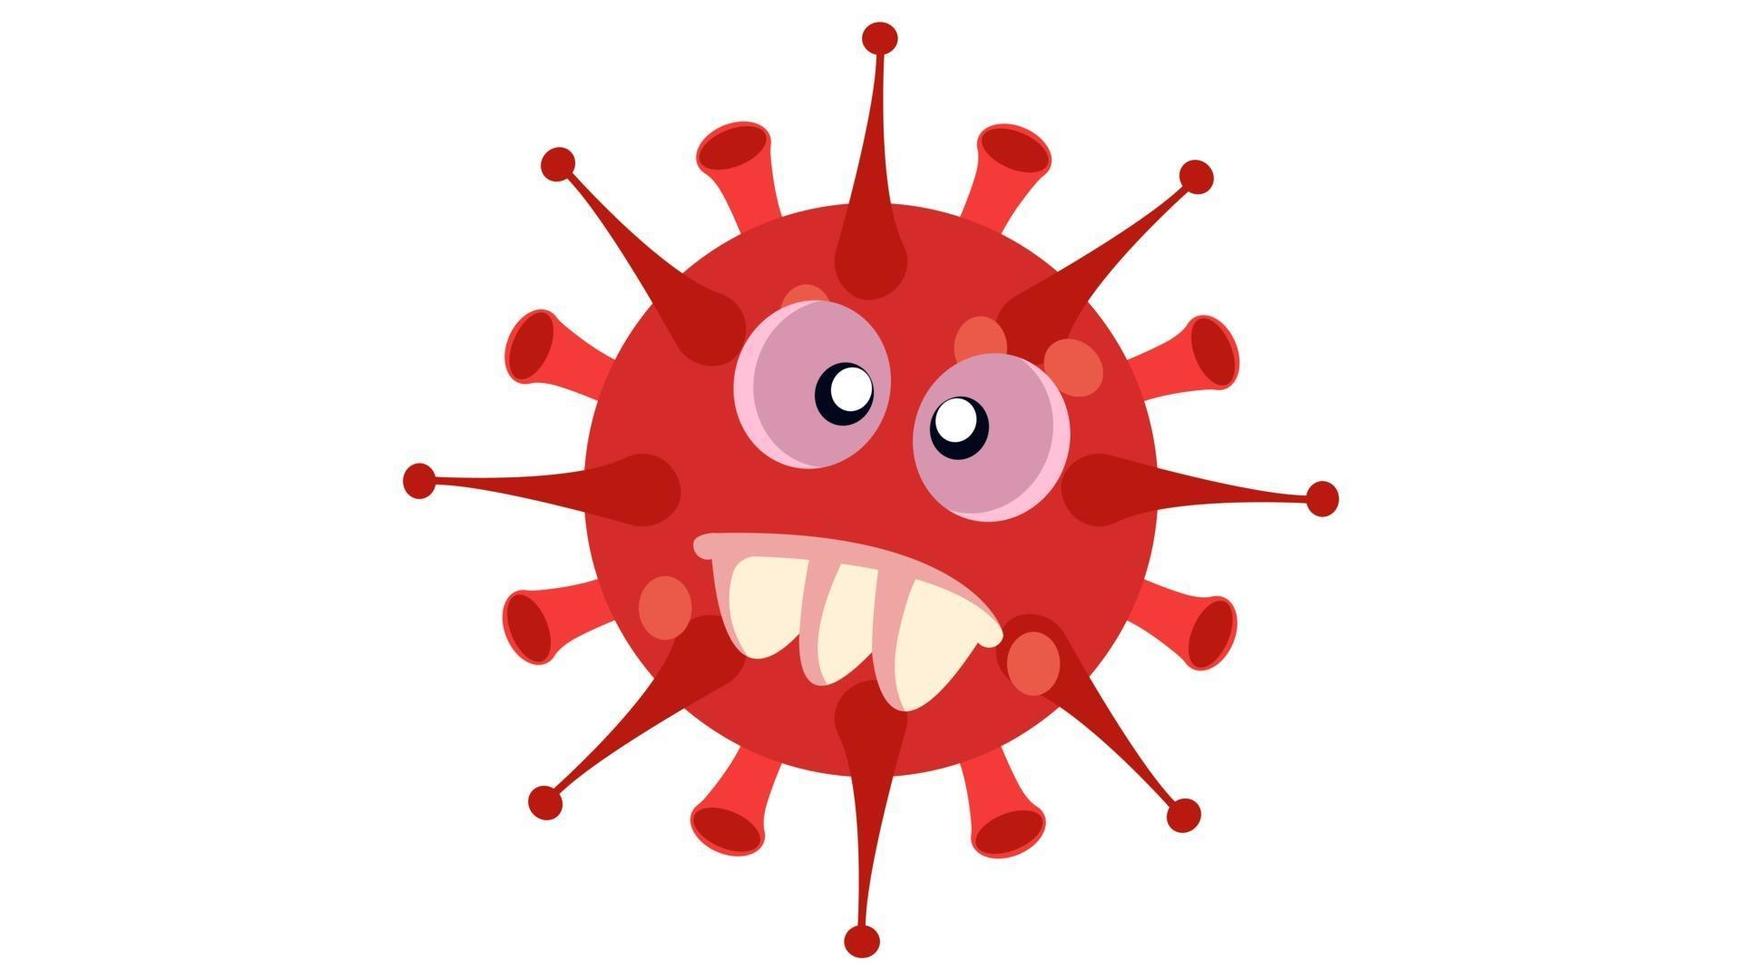 Illustration of cute red bacteria character. Cartoon microbes. Simple vector illustration EPS10 isolated on white background.